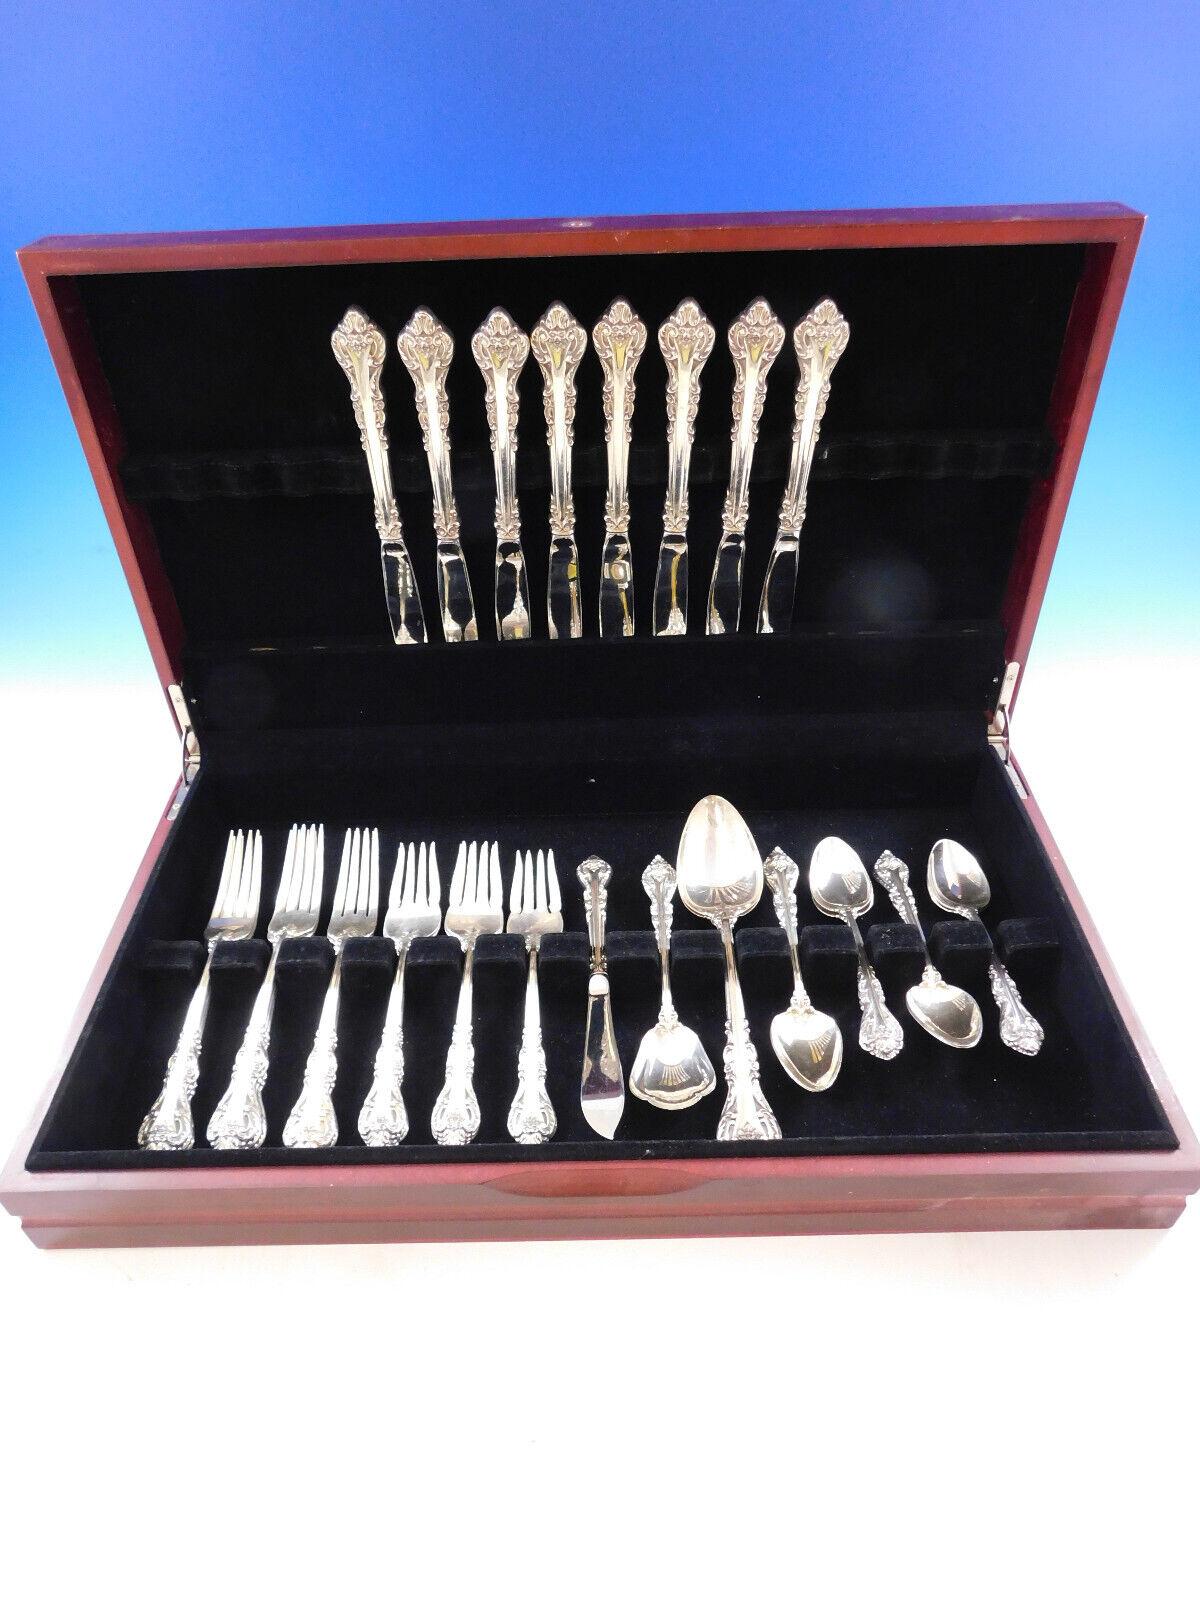 Masterpiece by International (handles not pierced) Sterling Silver Flatware set - 36 pieces. This set includes:

8 Knives, 9 1/4